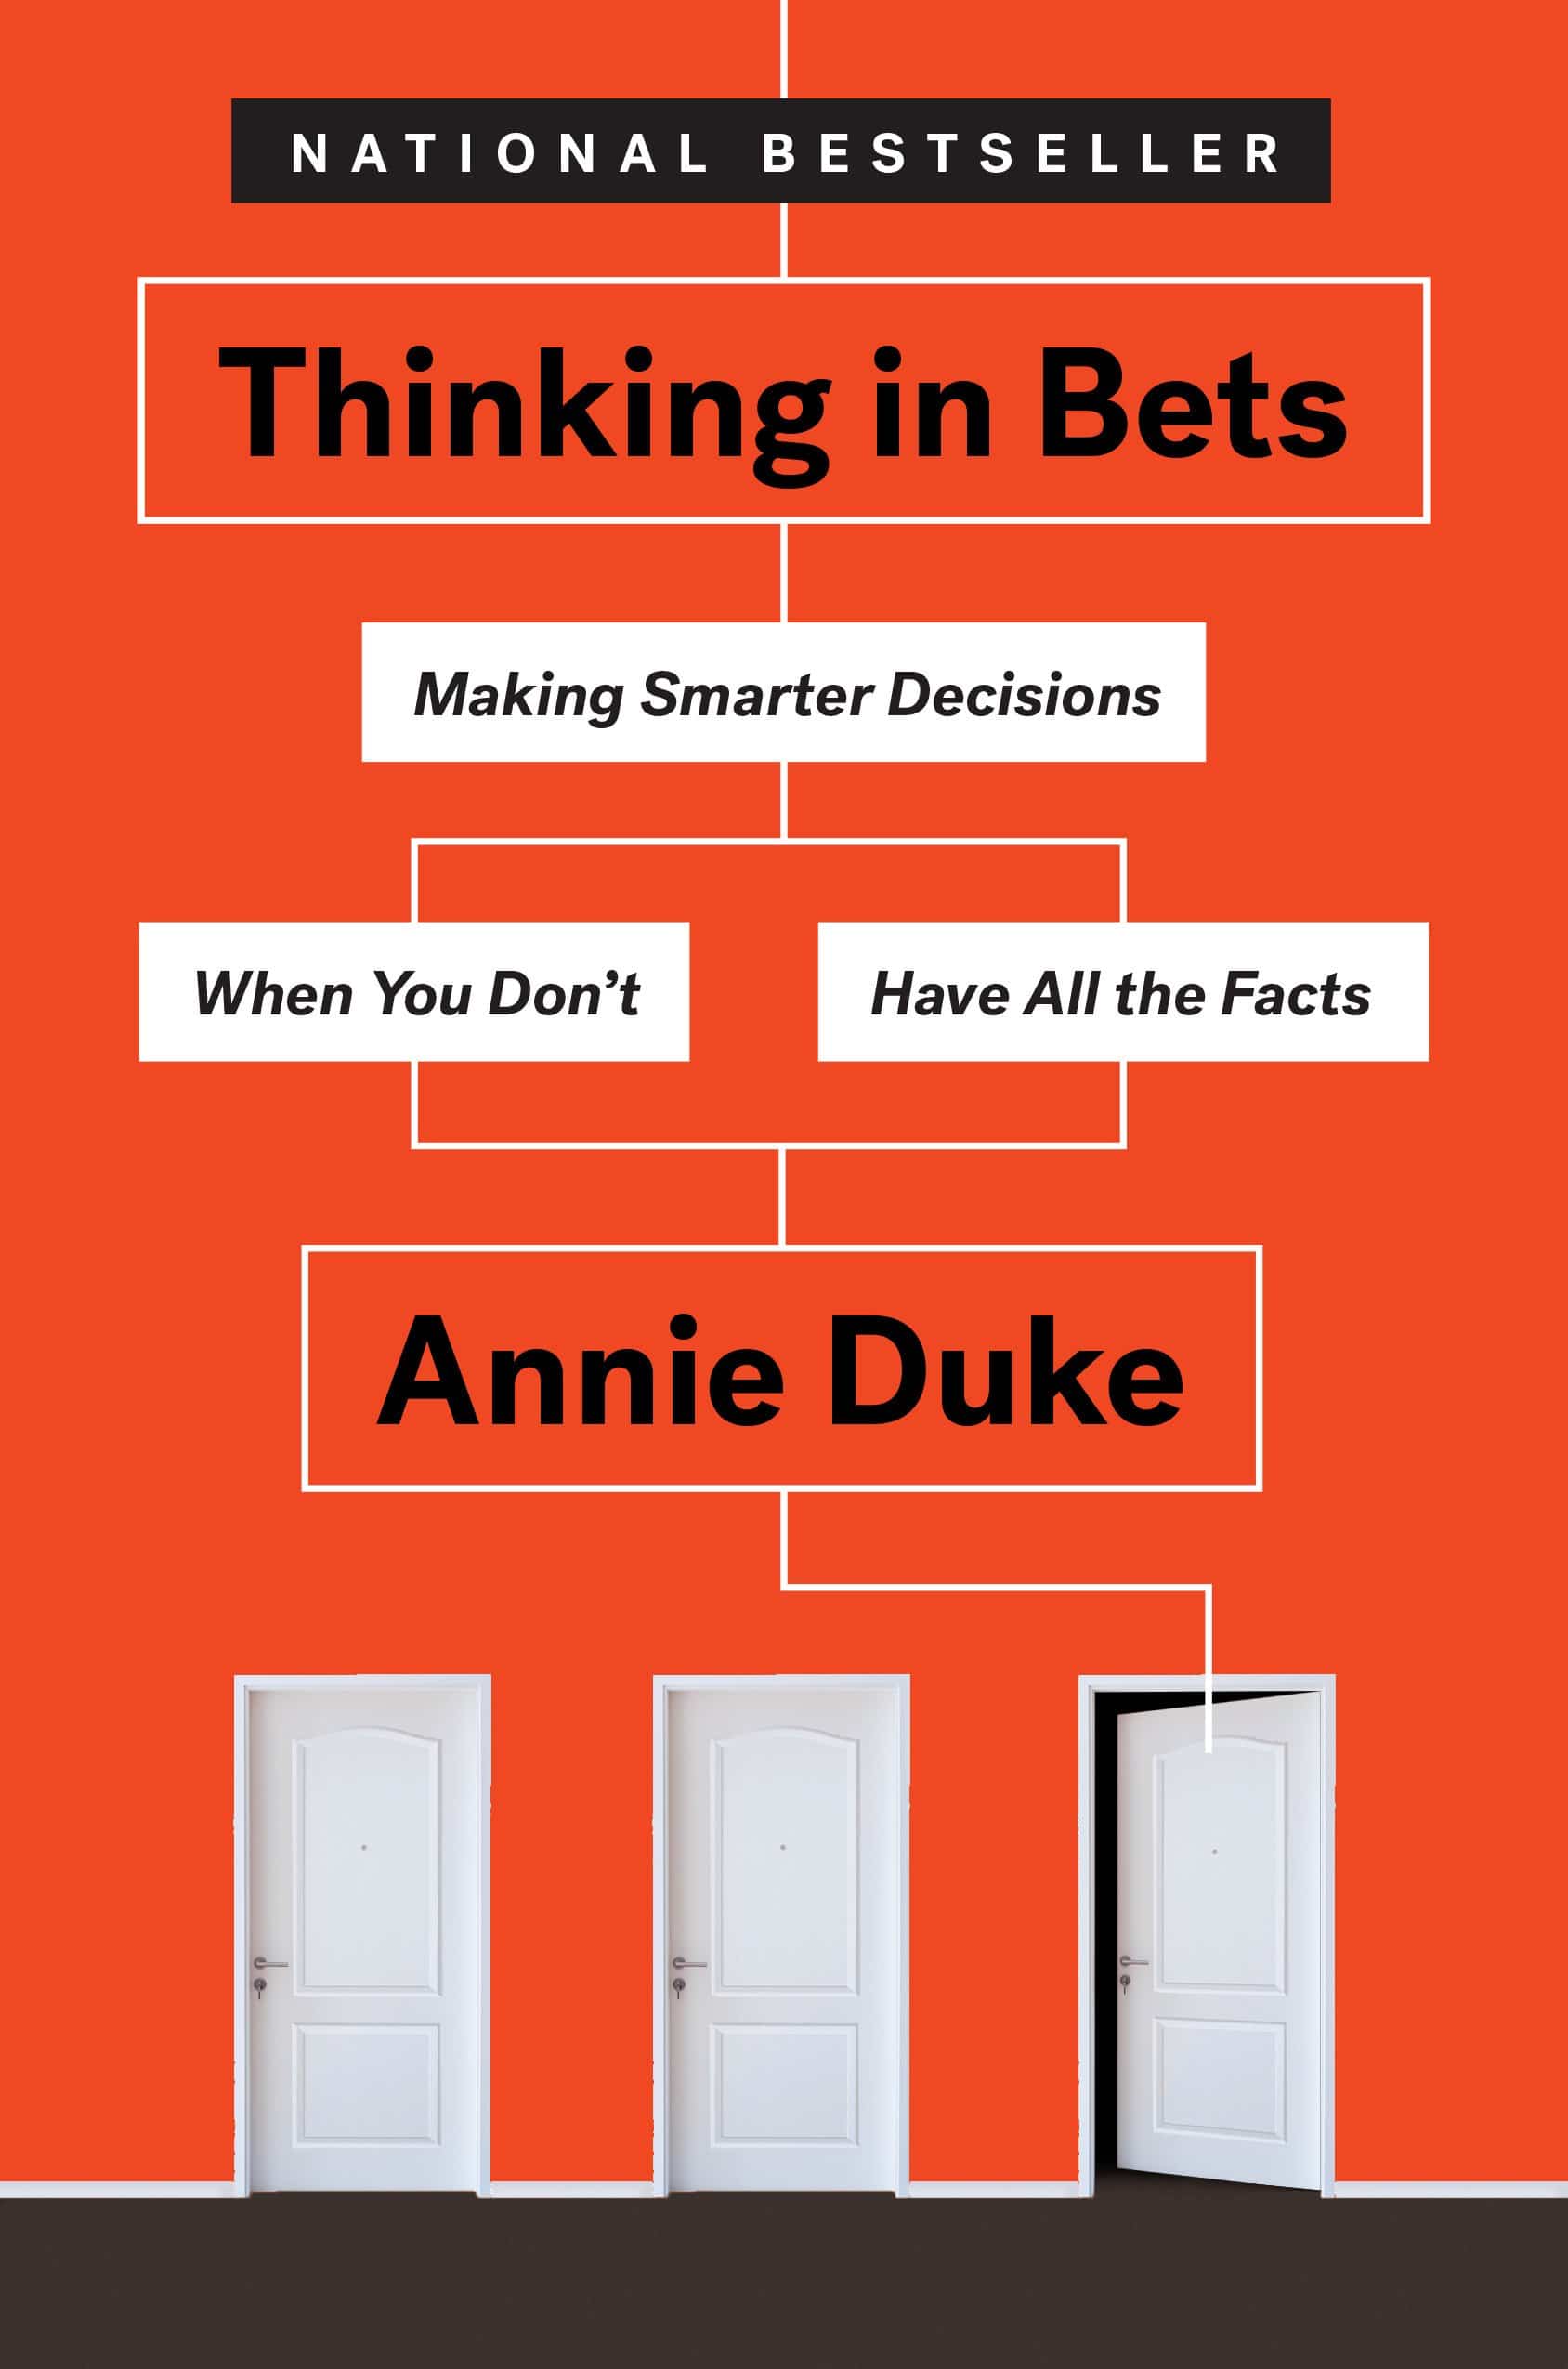 The cover of Thinking in Bets